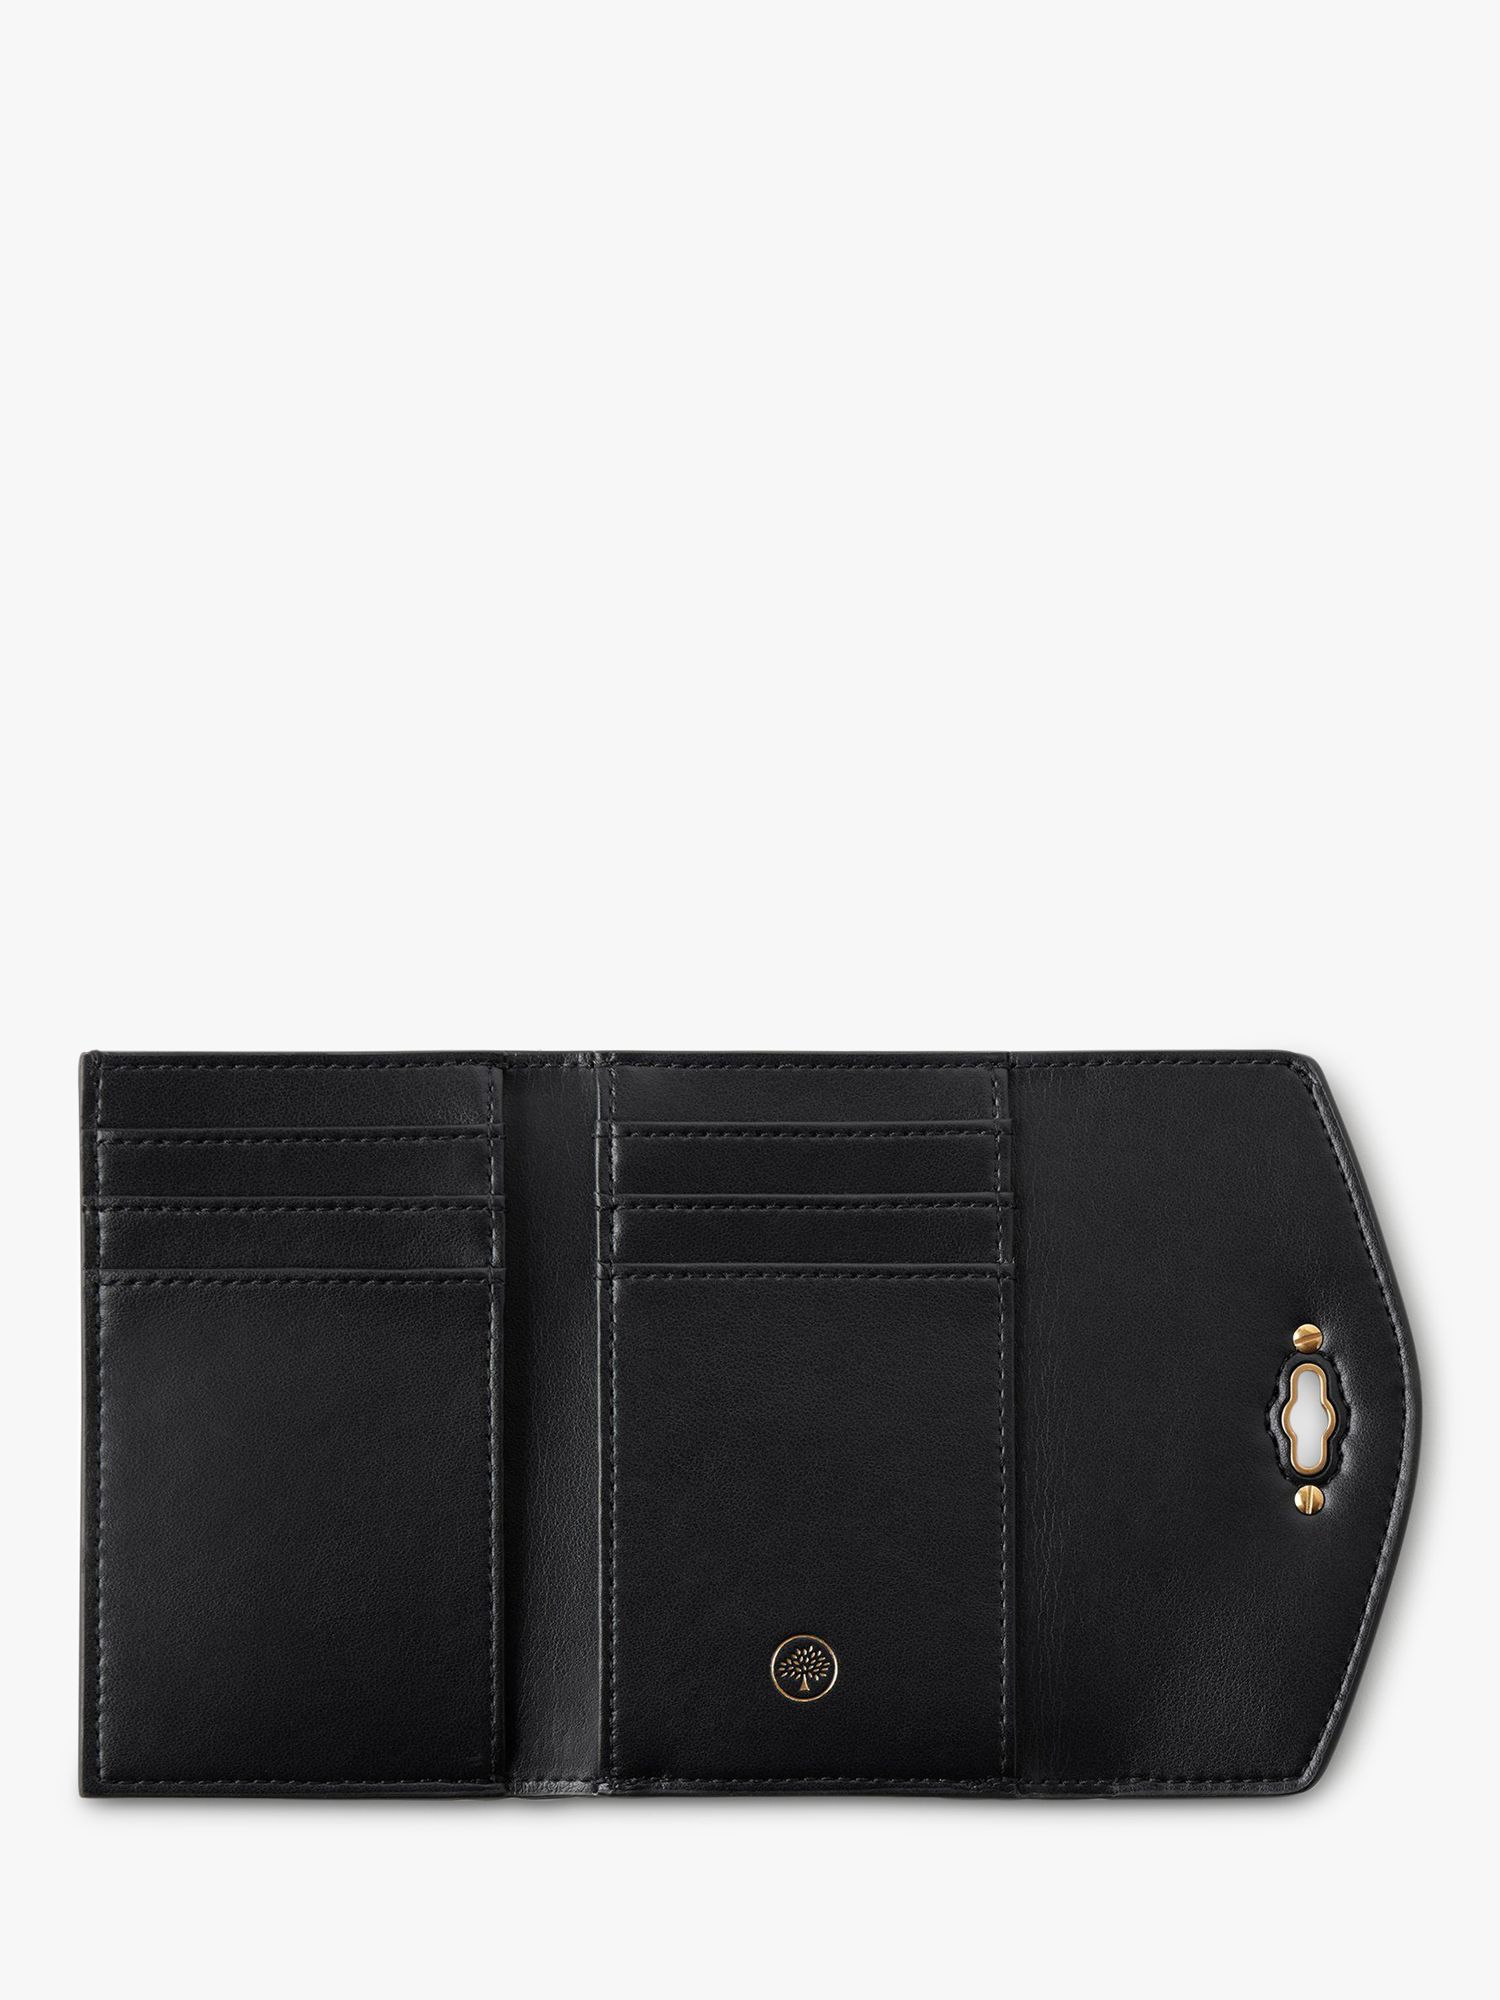 Buy Mulberry Darley Small Classic Grain Leather Folded Multi-Card Wallet Online at johnlewis.com